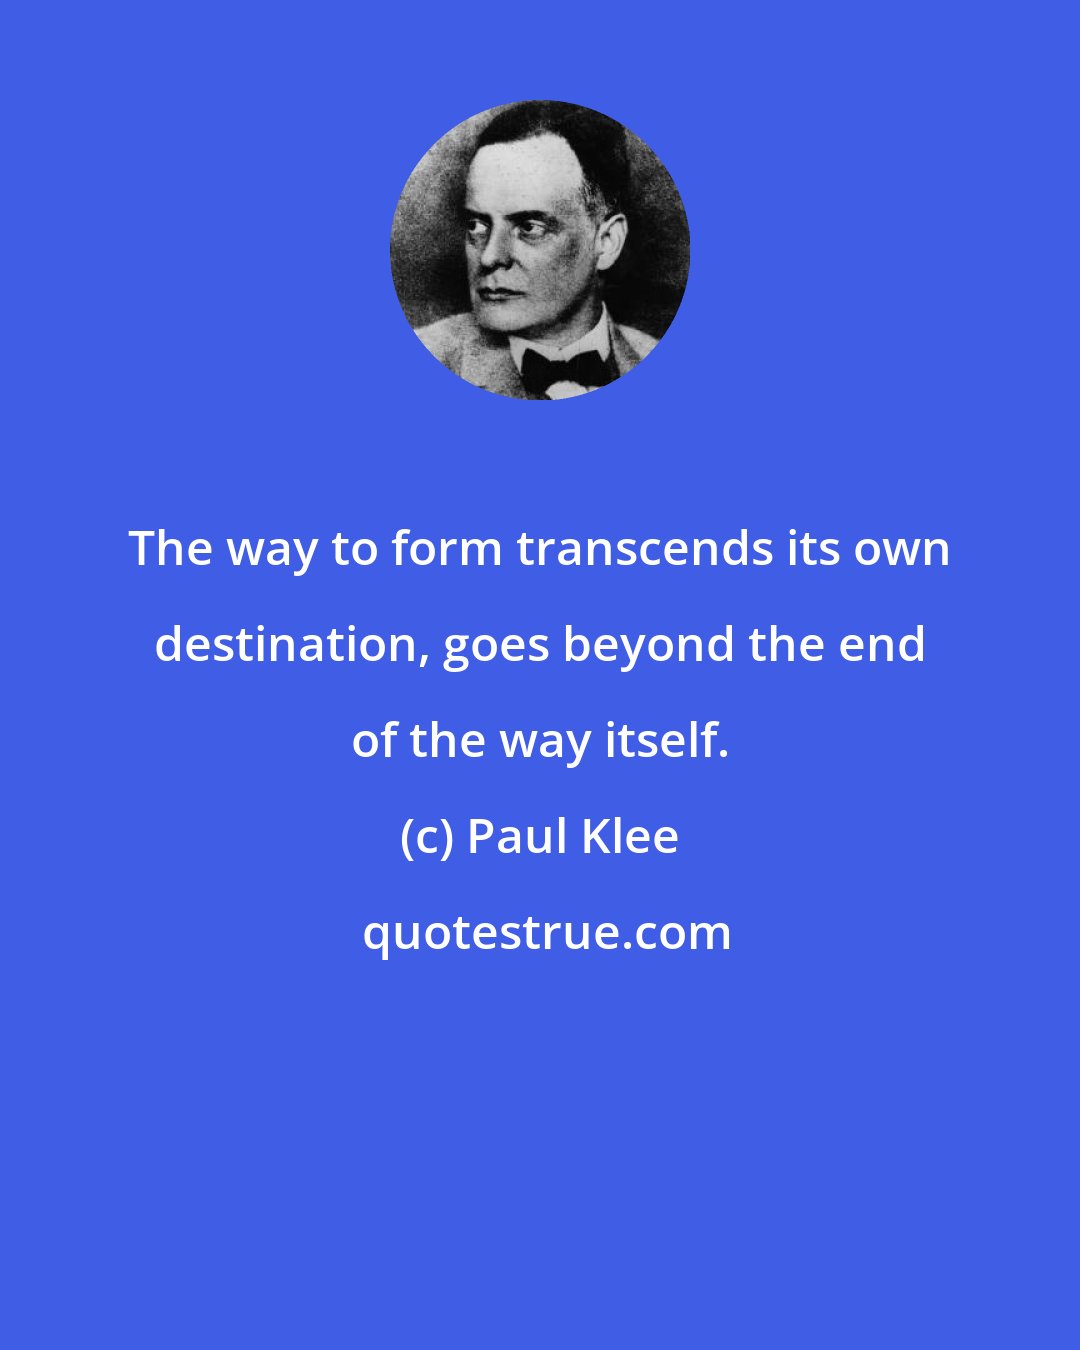 Paul Klee: The way to form transcends its own destination, goes beyond the end of the way itself.